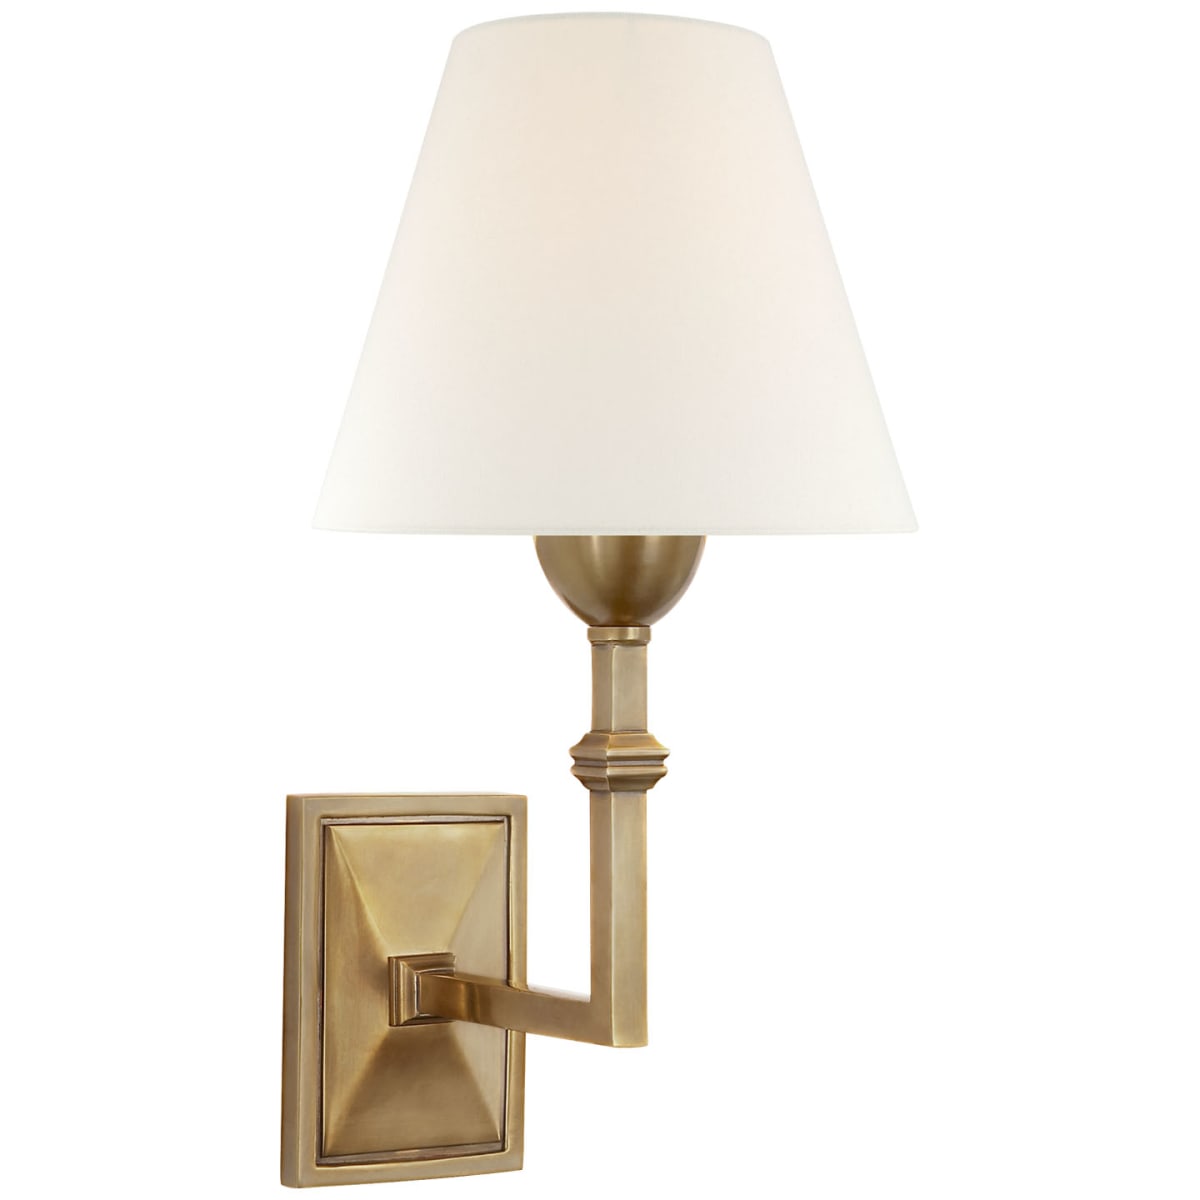 Visual Comfort Architectural Wall Sconce in Hand-Rubbed Antique Brass